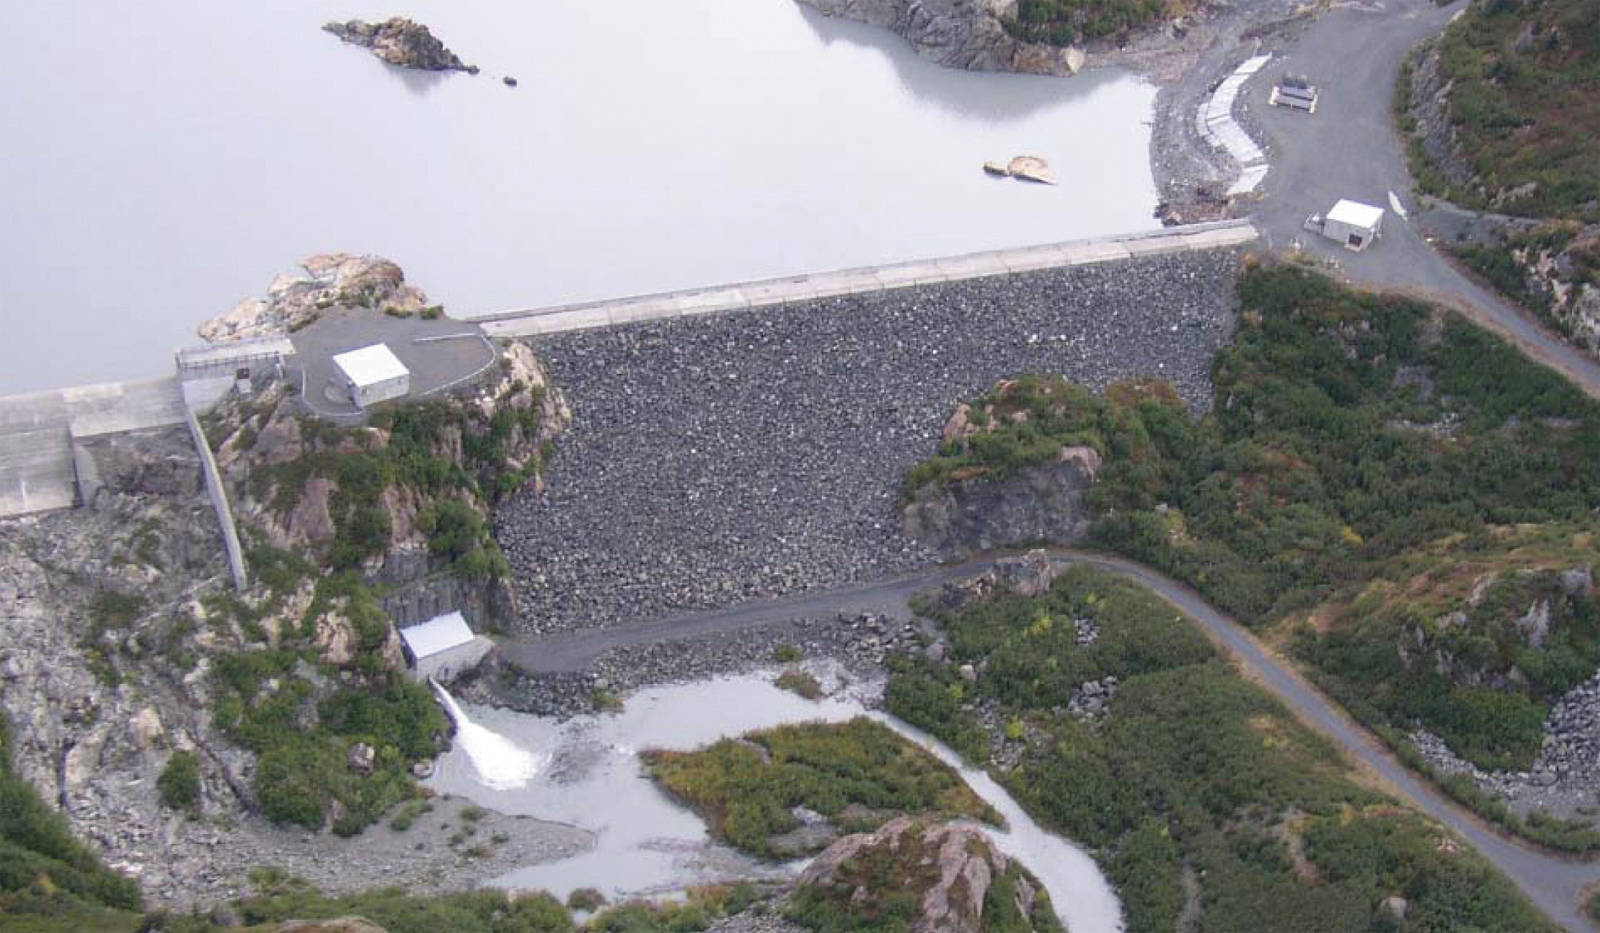 Open since 1991, the Bradley Lake hydropower plant 30 miles east of Homer supplies the cheapest energy on the Railbelt at about 4 cents per kilowatt hour. (Image/Alaska Energy Authority)